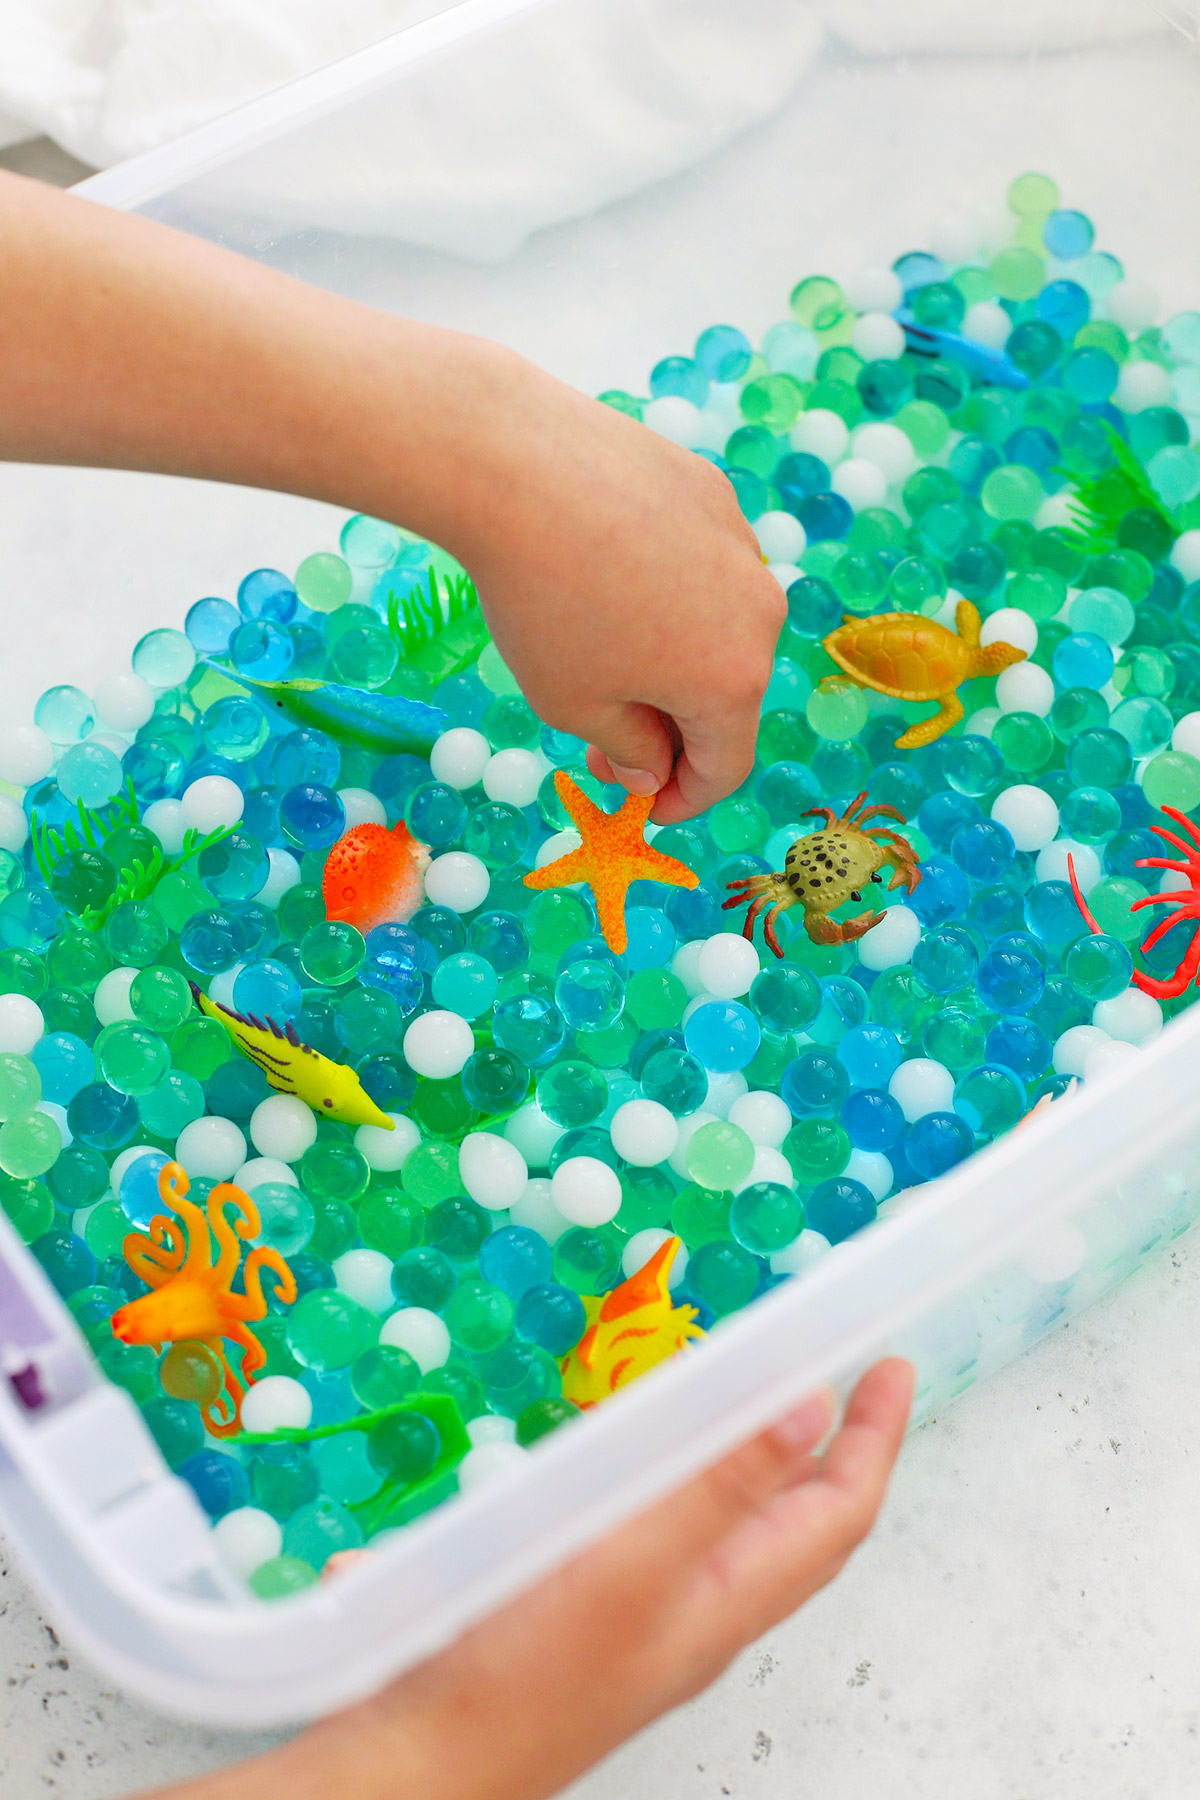 How to Make an Ocean Sensory Bin with Water Beads